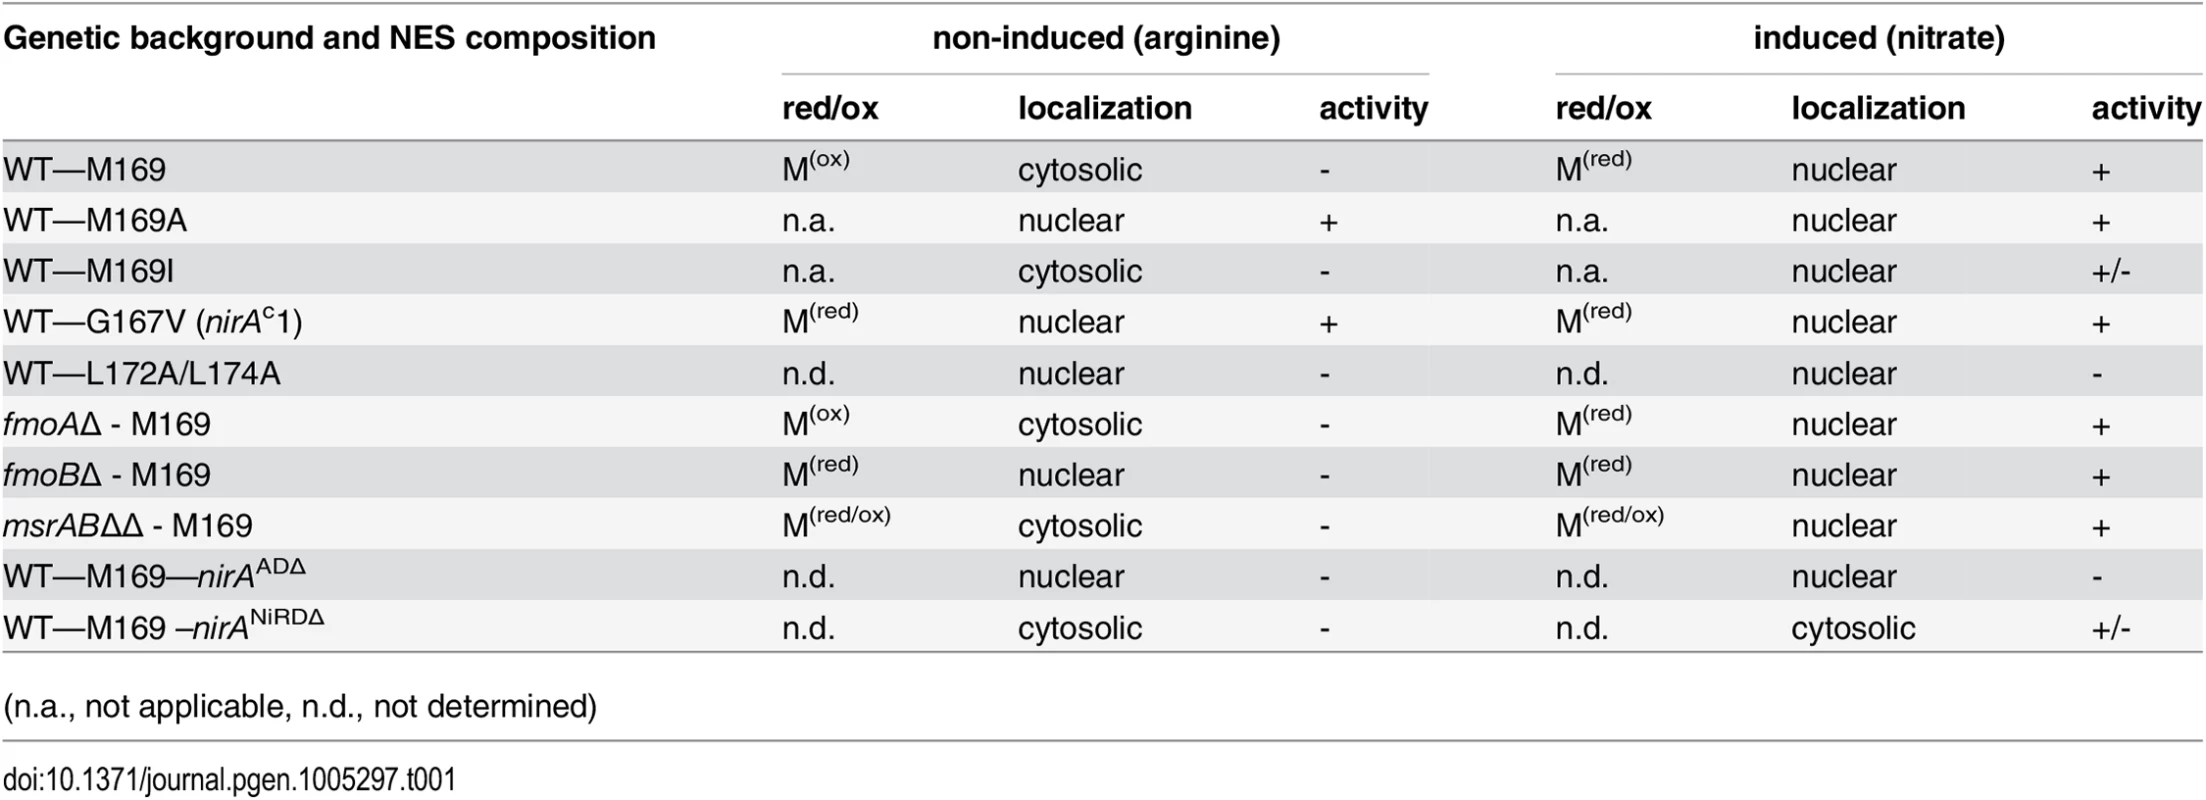 Overview of correlations between NES sequences, oxidation status of M169 (red/ox), NirA-GFP subcellular localization and NirA transcriptional activity in different genetic backgrounds of strains grown under non-inducing or inducing conditions.